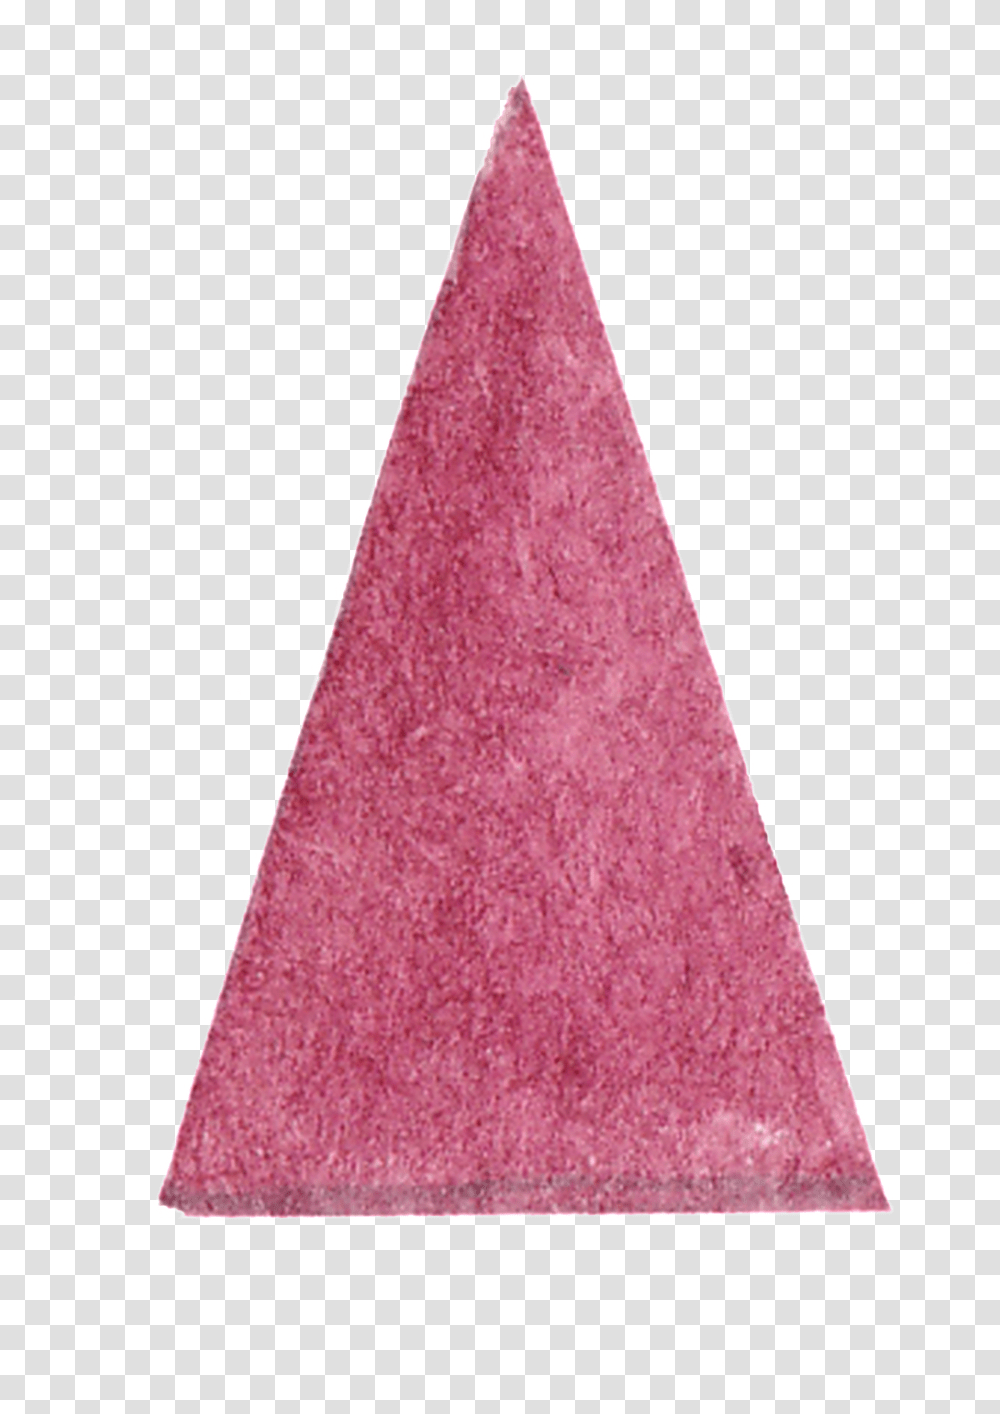 This Graphics Is Pink Triangle Decorative Triangle, Apparel, Party Hat, Cone Transparent Png